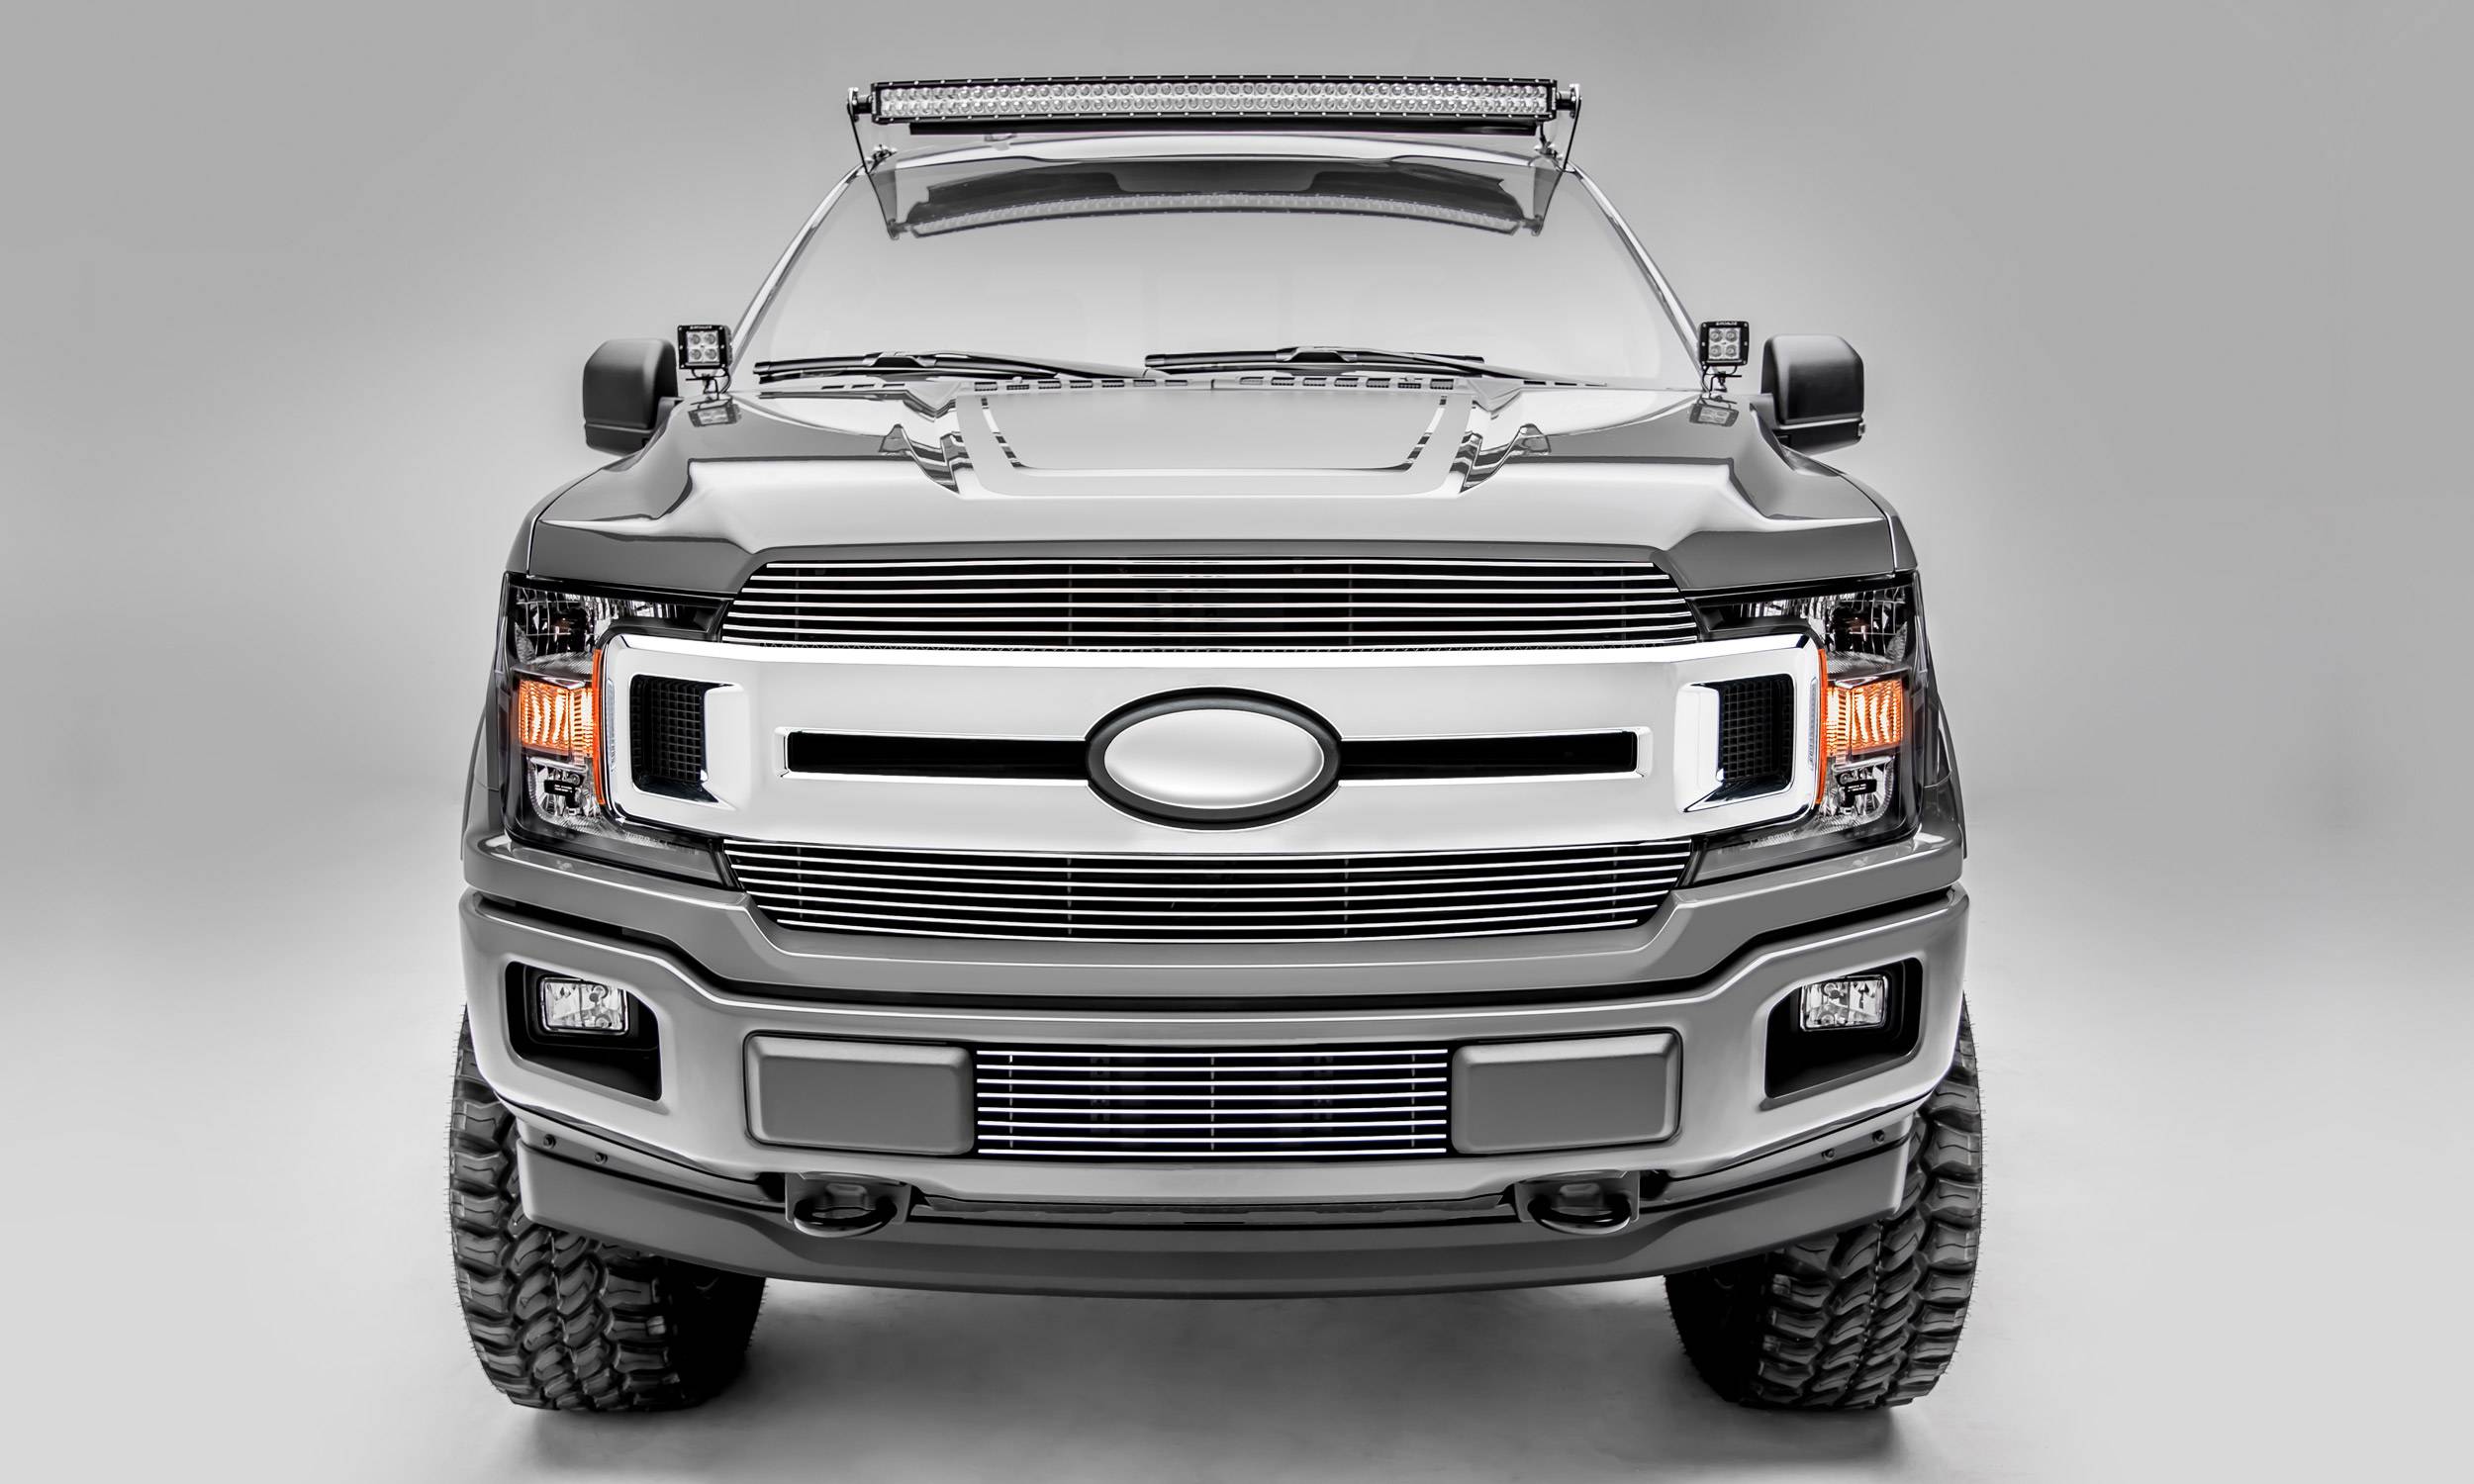 T-REX Grilles - 2018-2020 F-150 XLT, Lariat Billet Grille, Polished, 2 Pc, Insert, Does Not Fit Vehicles with Camera - Part # 20571